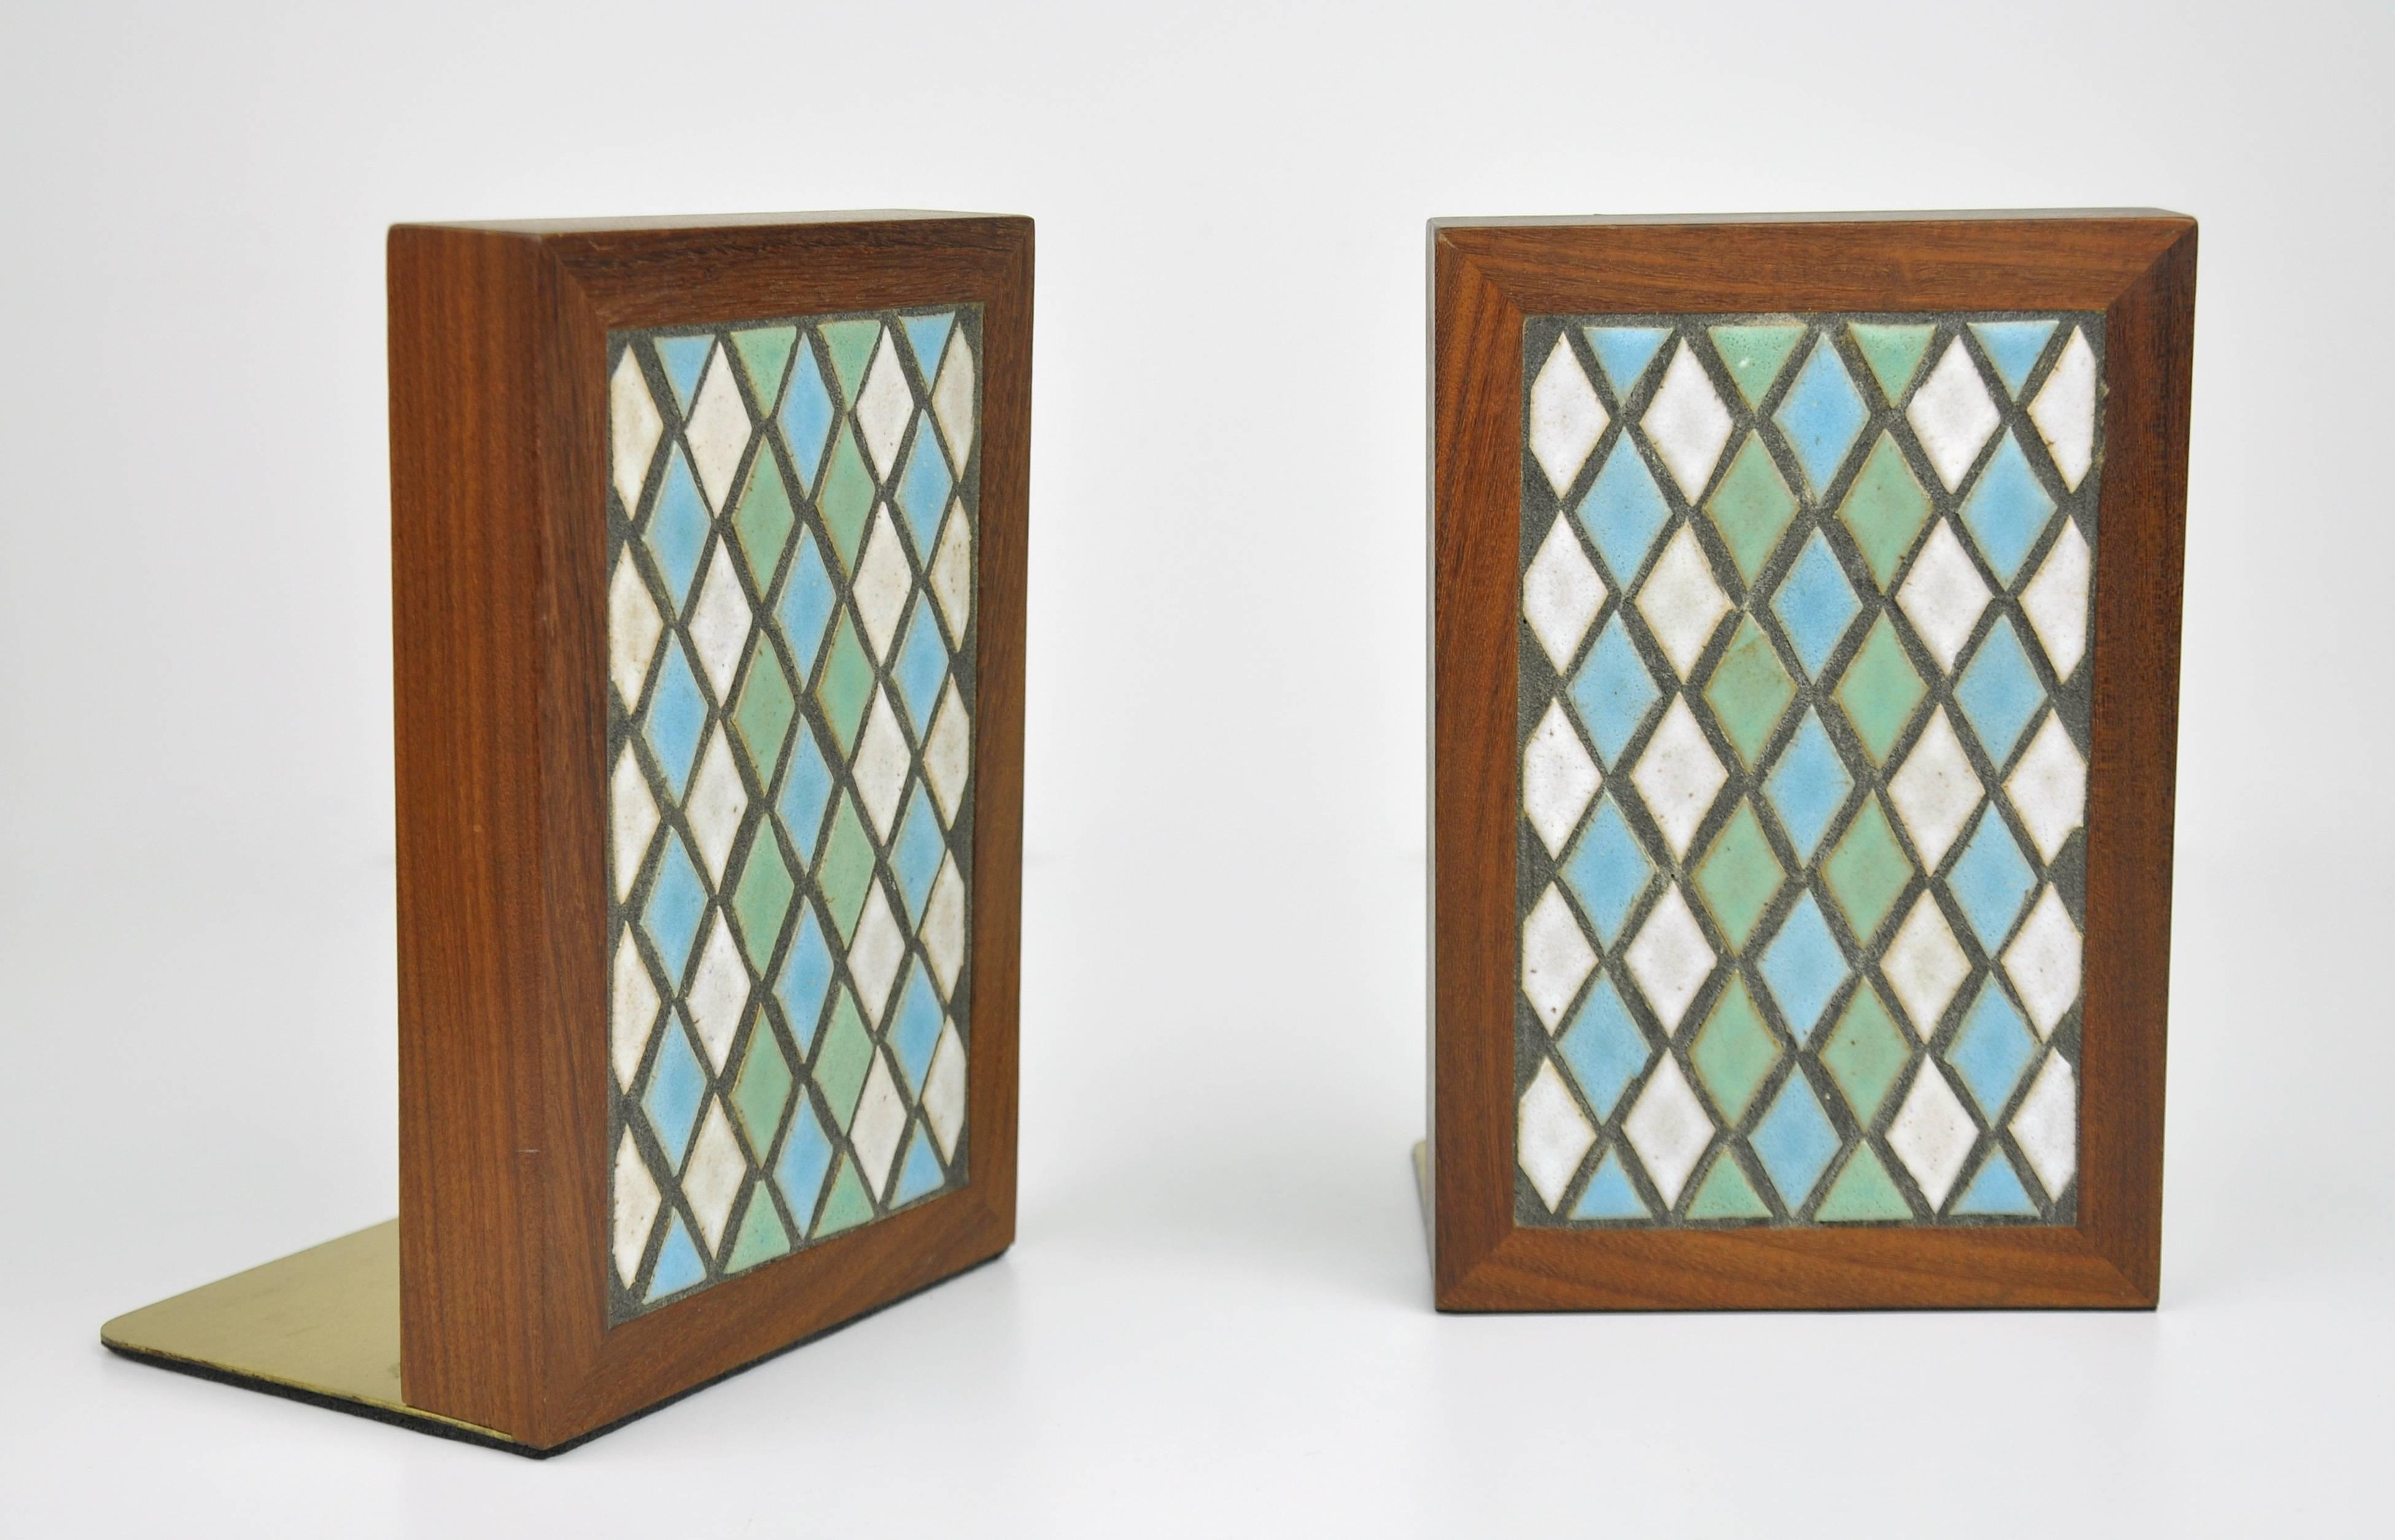 Colorful and decorative pair of Mid-Century Modern walnut, stoneware ceramic tile and brass model TBE1-21 book ends, dating from the late 1950s. The fronts feature a diamond pattern of turquoise / light blue, pastel green and off-white / cream tiles